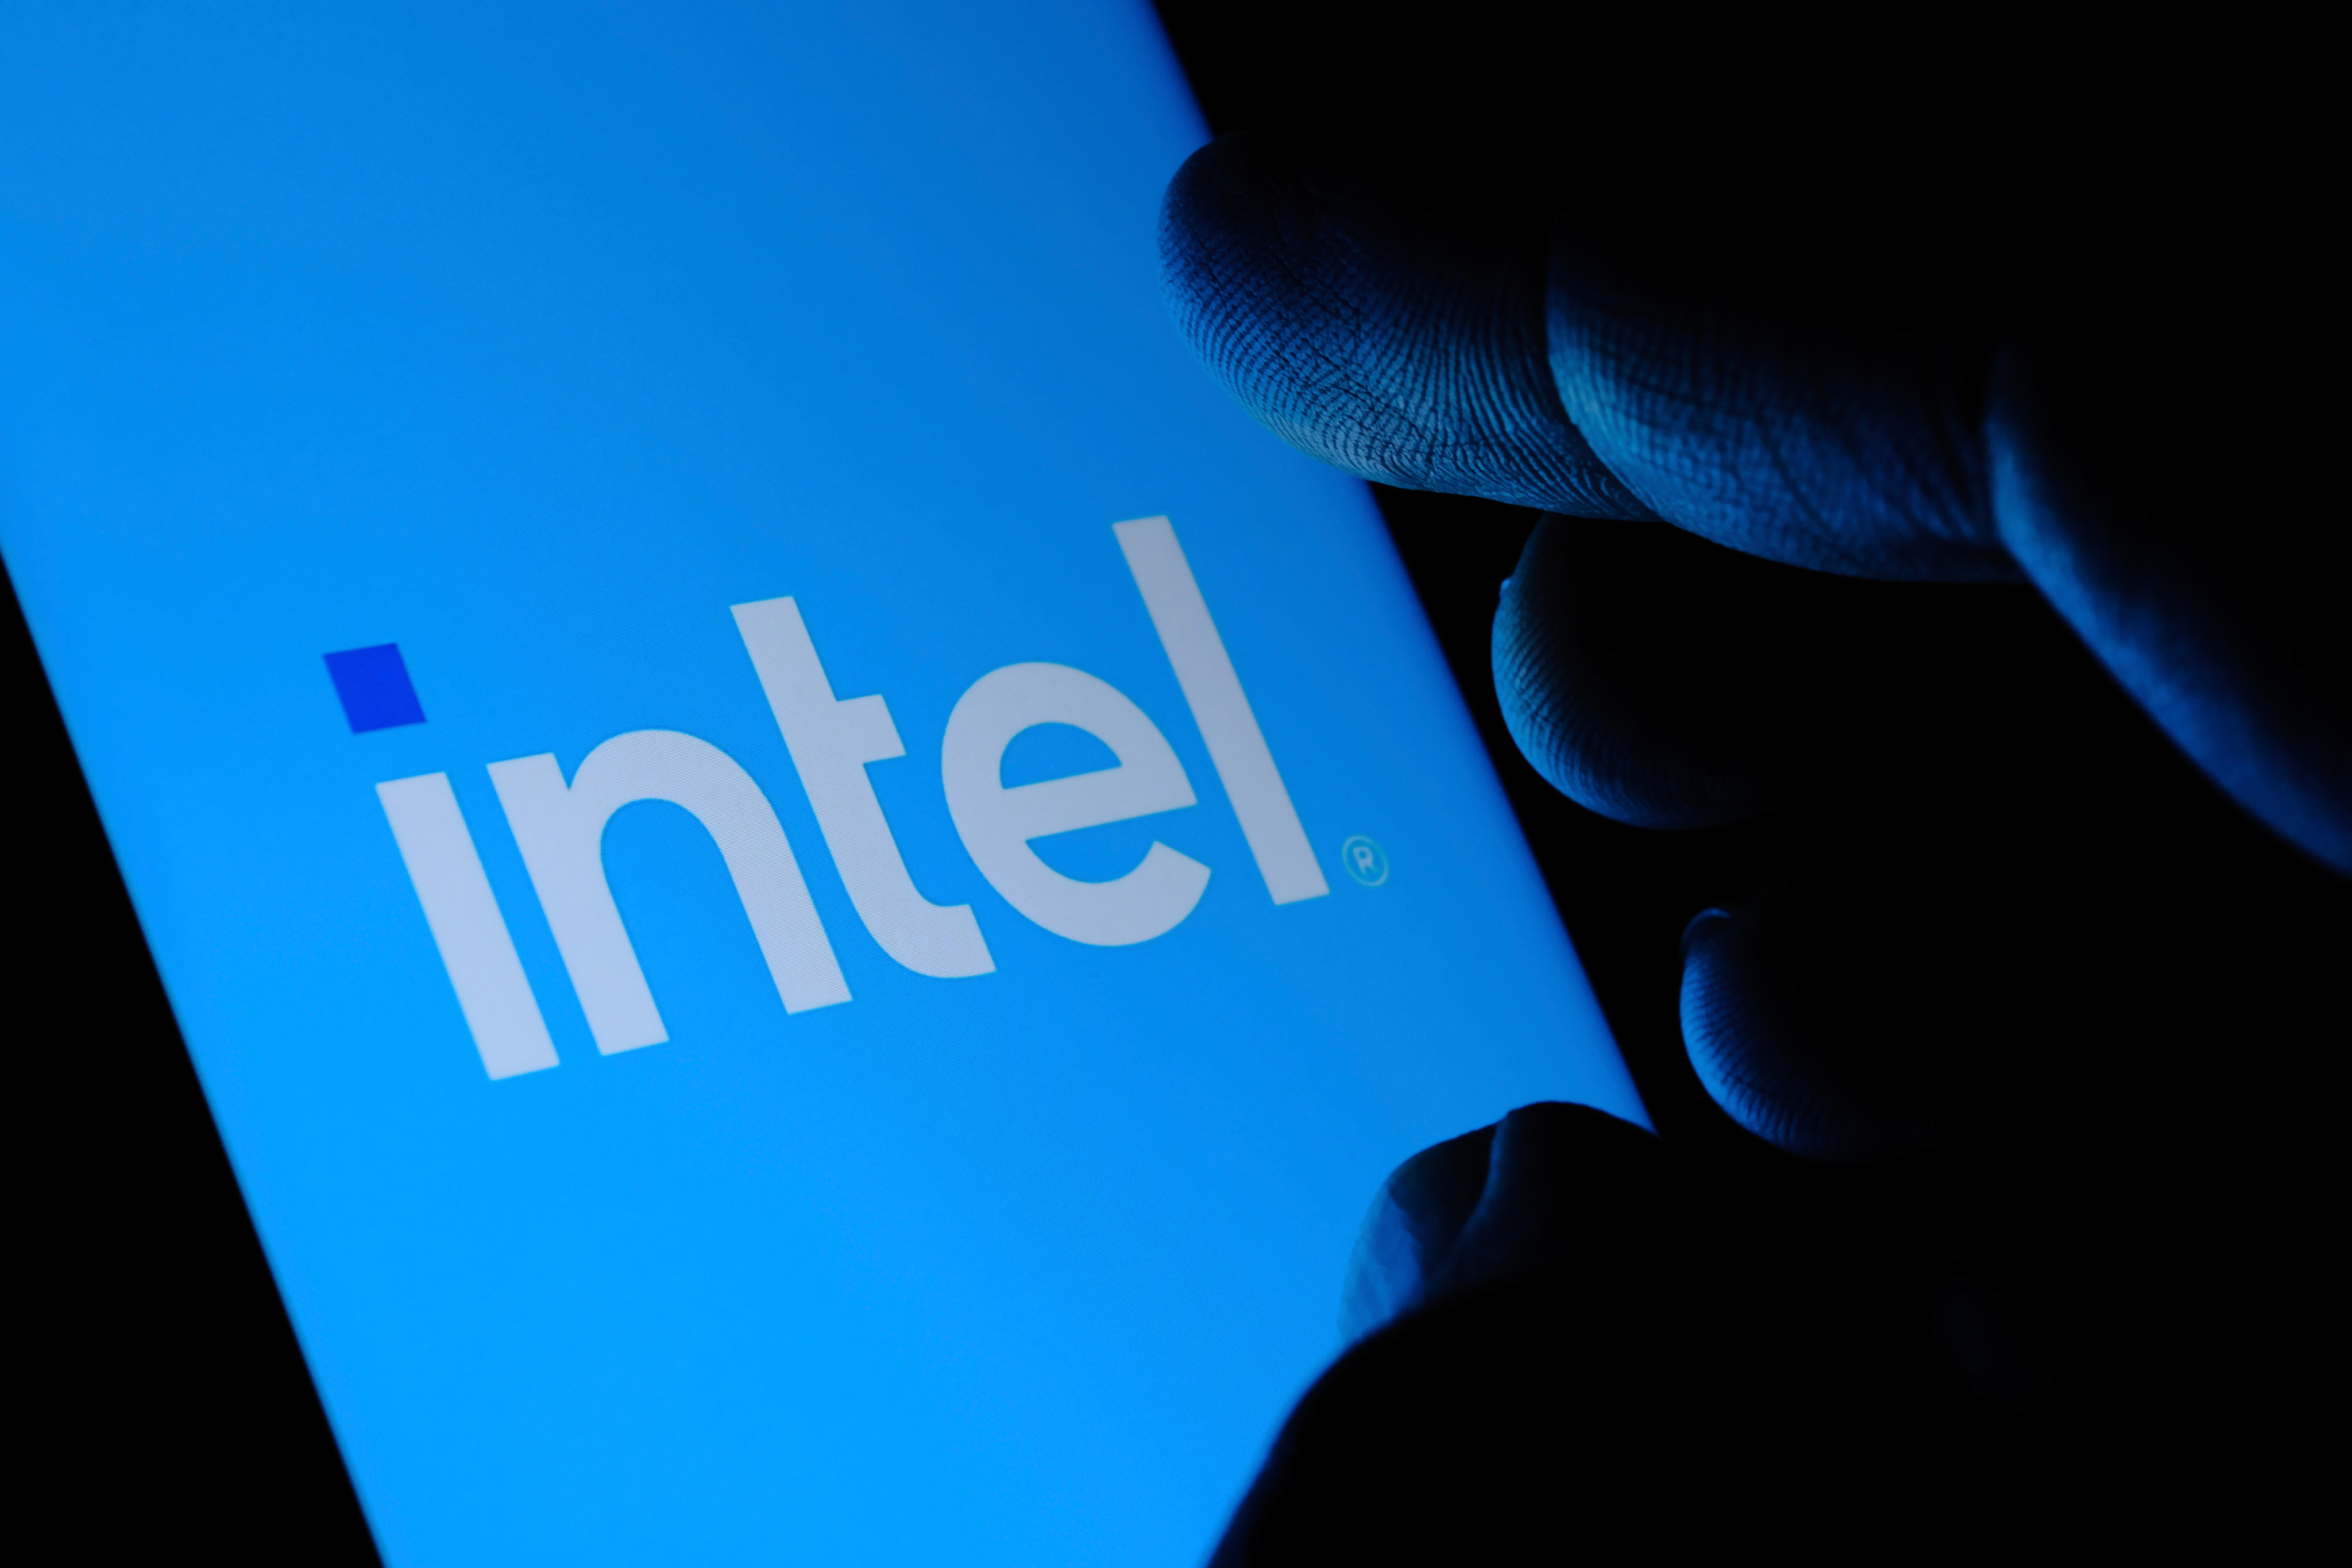 The Intel logo is seen on a smartphone screen in this arranged photograph. Photo: Shutterstock Images